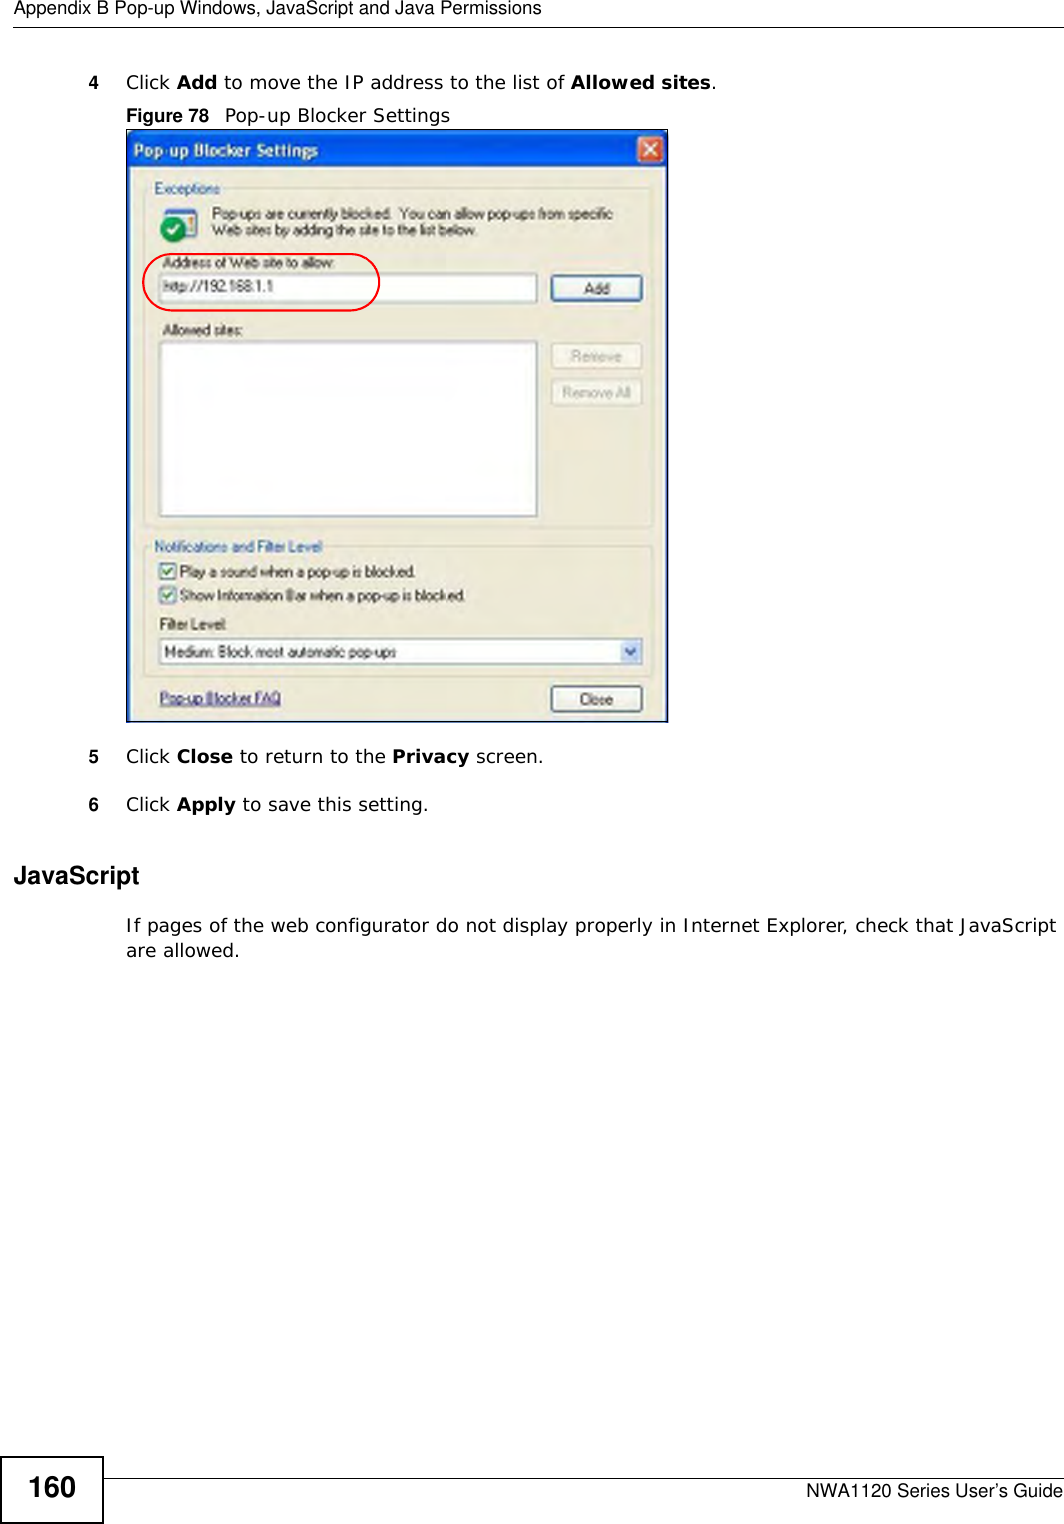 Appendix B Pop-up Windows, JavaScript and Java PermissionsNWA1120 Series User’s Guide1604Click Add to move the IP address to the list of Allowed sites.Figure 78   Pop-up Blocker Settings5Click Close to return to the Privacy screen. 6Click Apply to save this setting. JavaScriptIf pages of the web configurator do not display properly in Internet Explorer, check that JavaScript are allowed. 